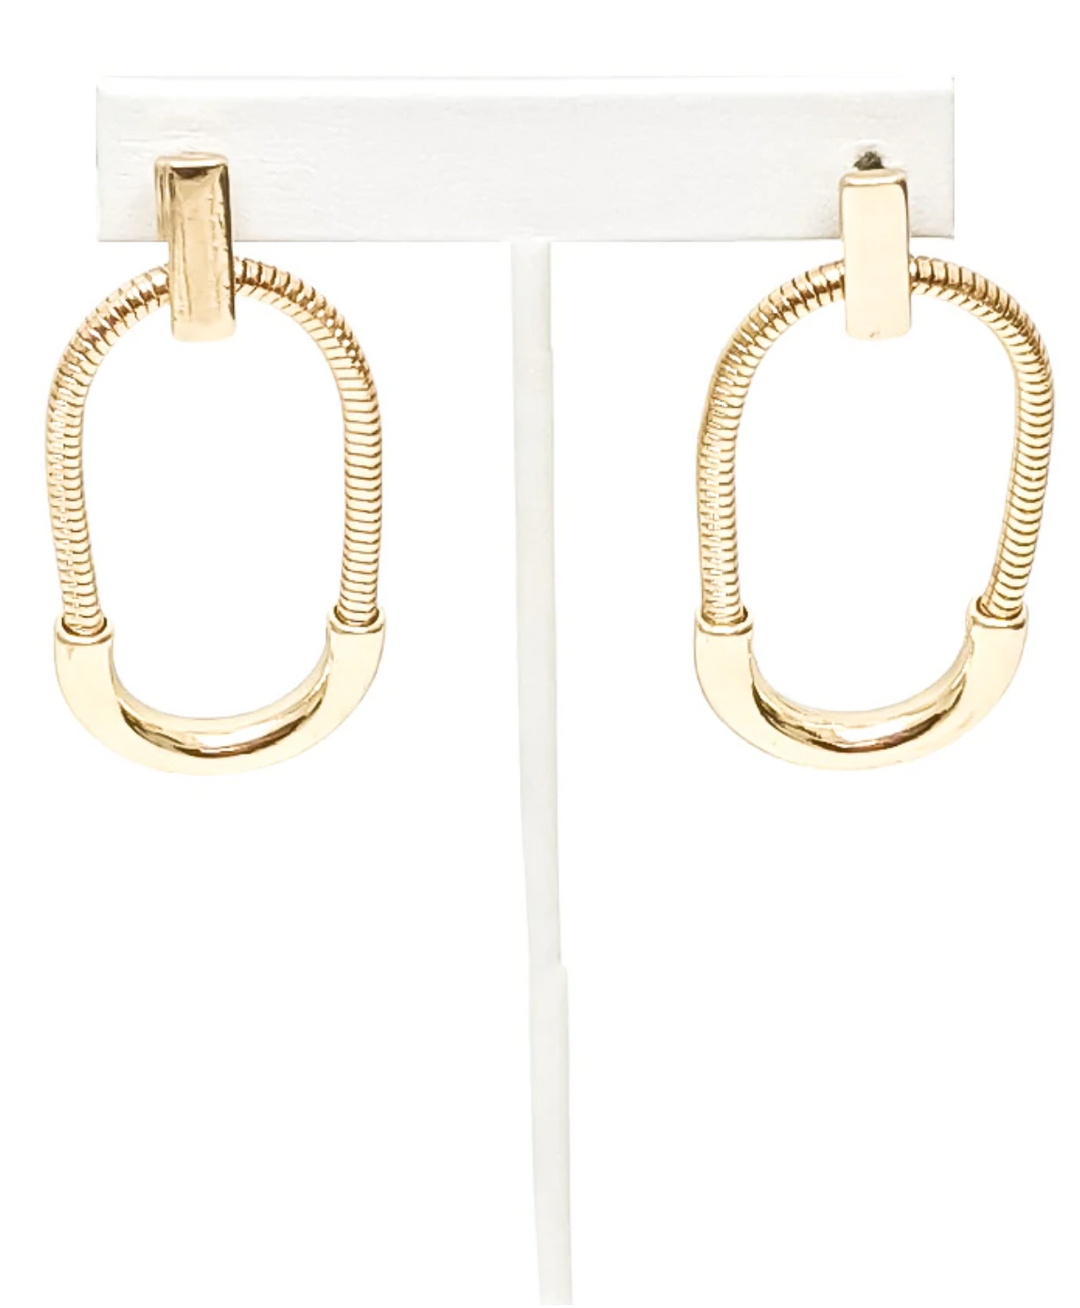 Kalie Oval Chain and Metal Earrings, Gold